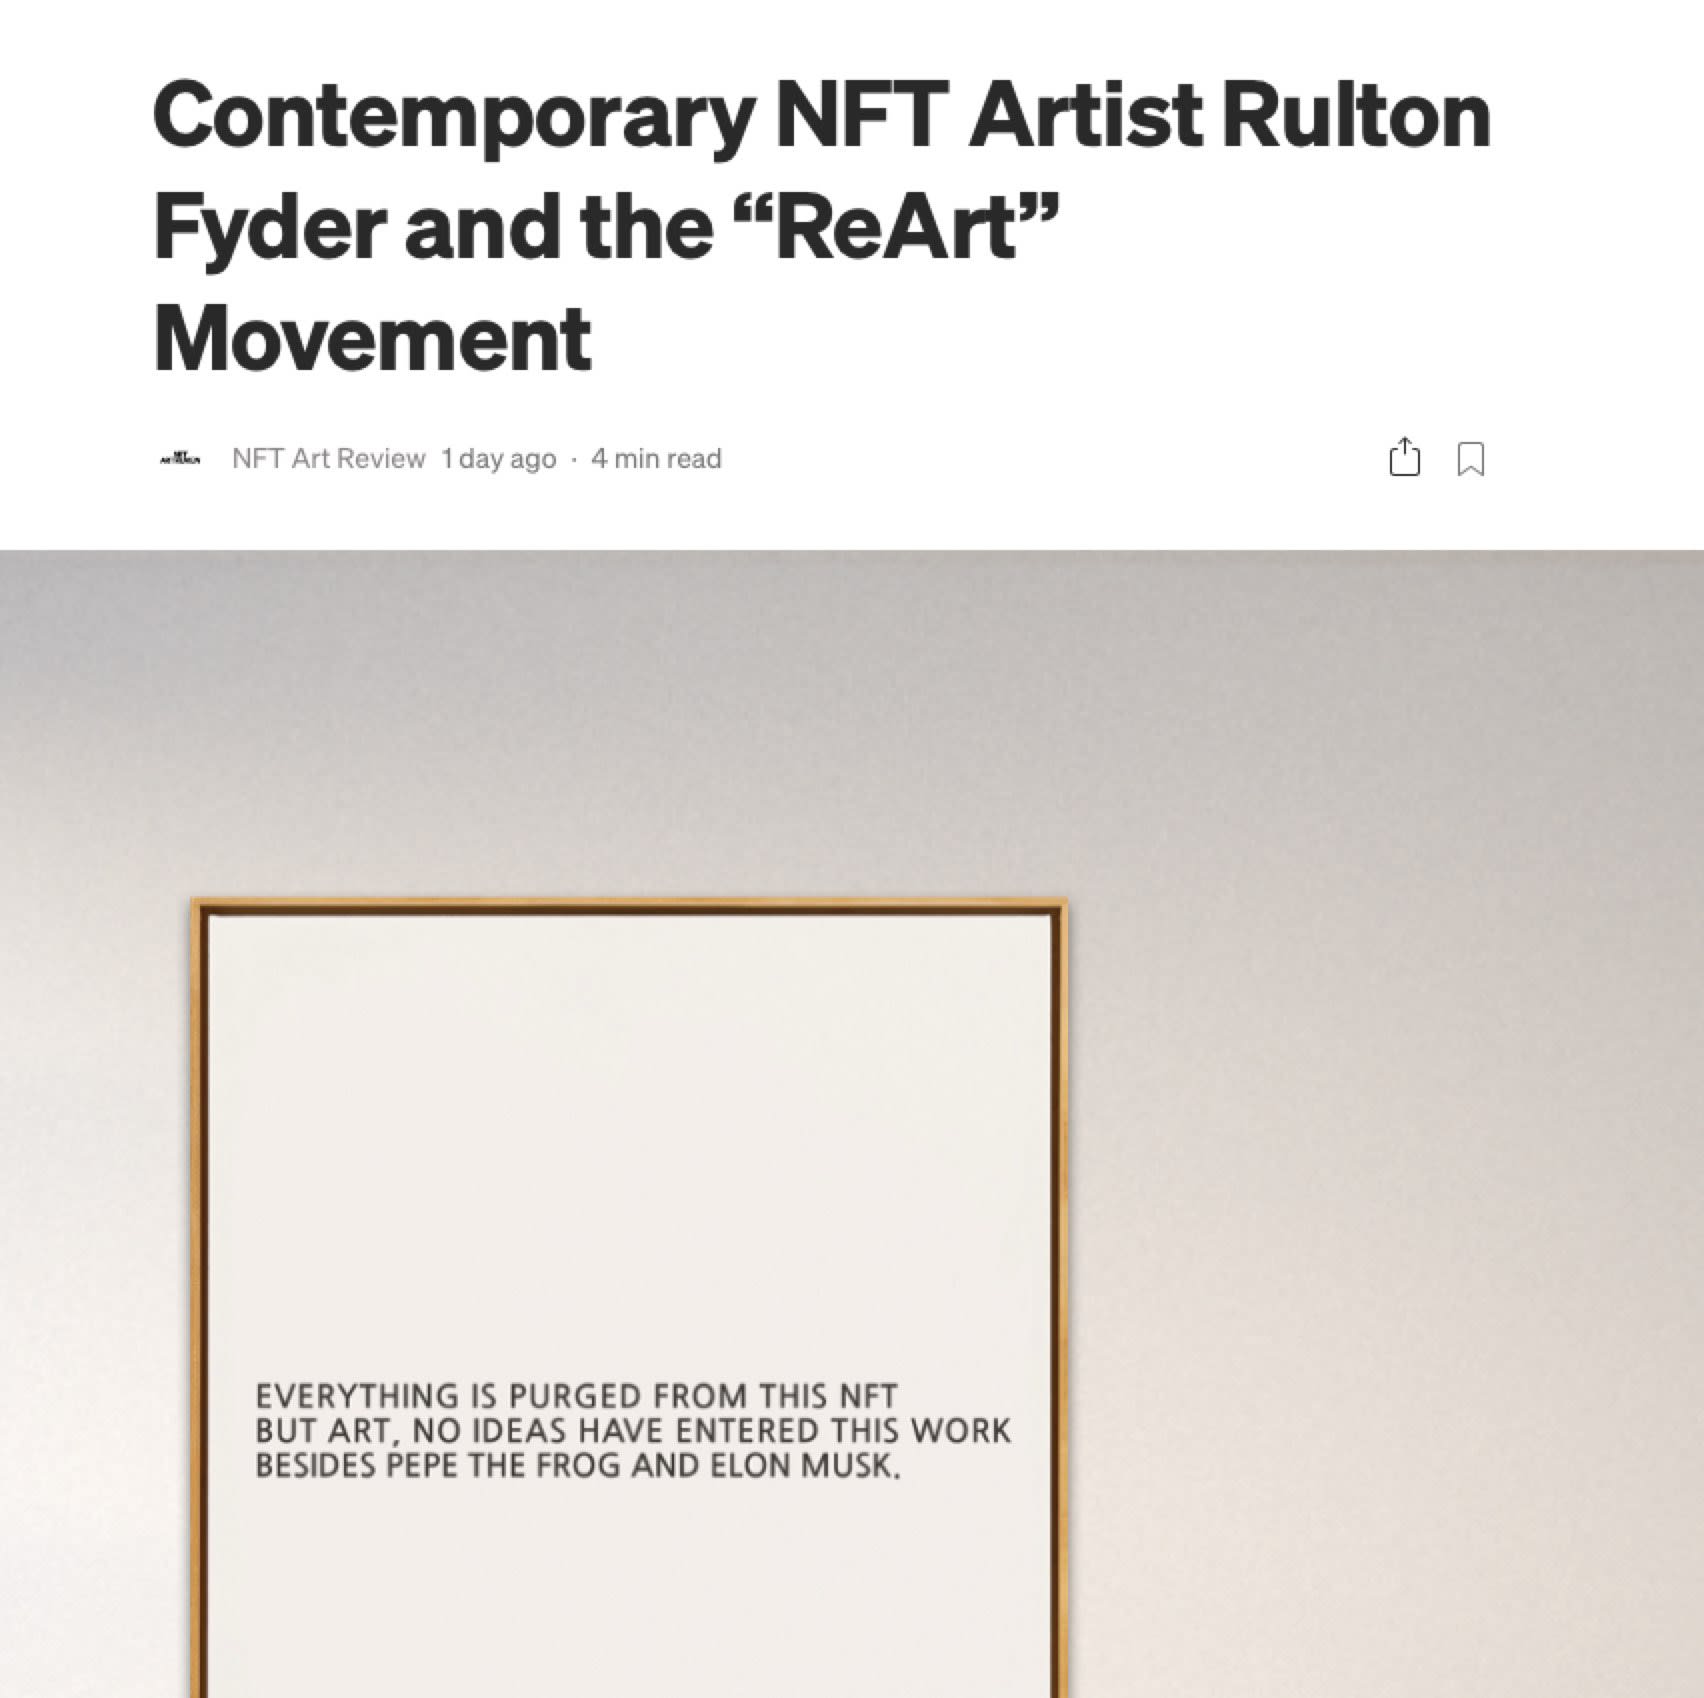 NFT Art Review discusses Rulton Fyder and the "ReArt